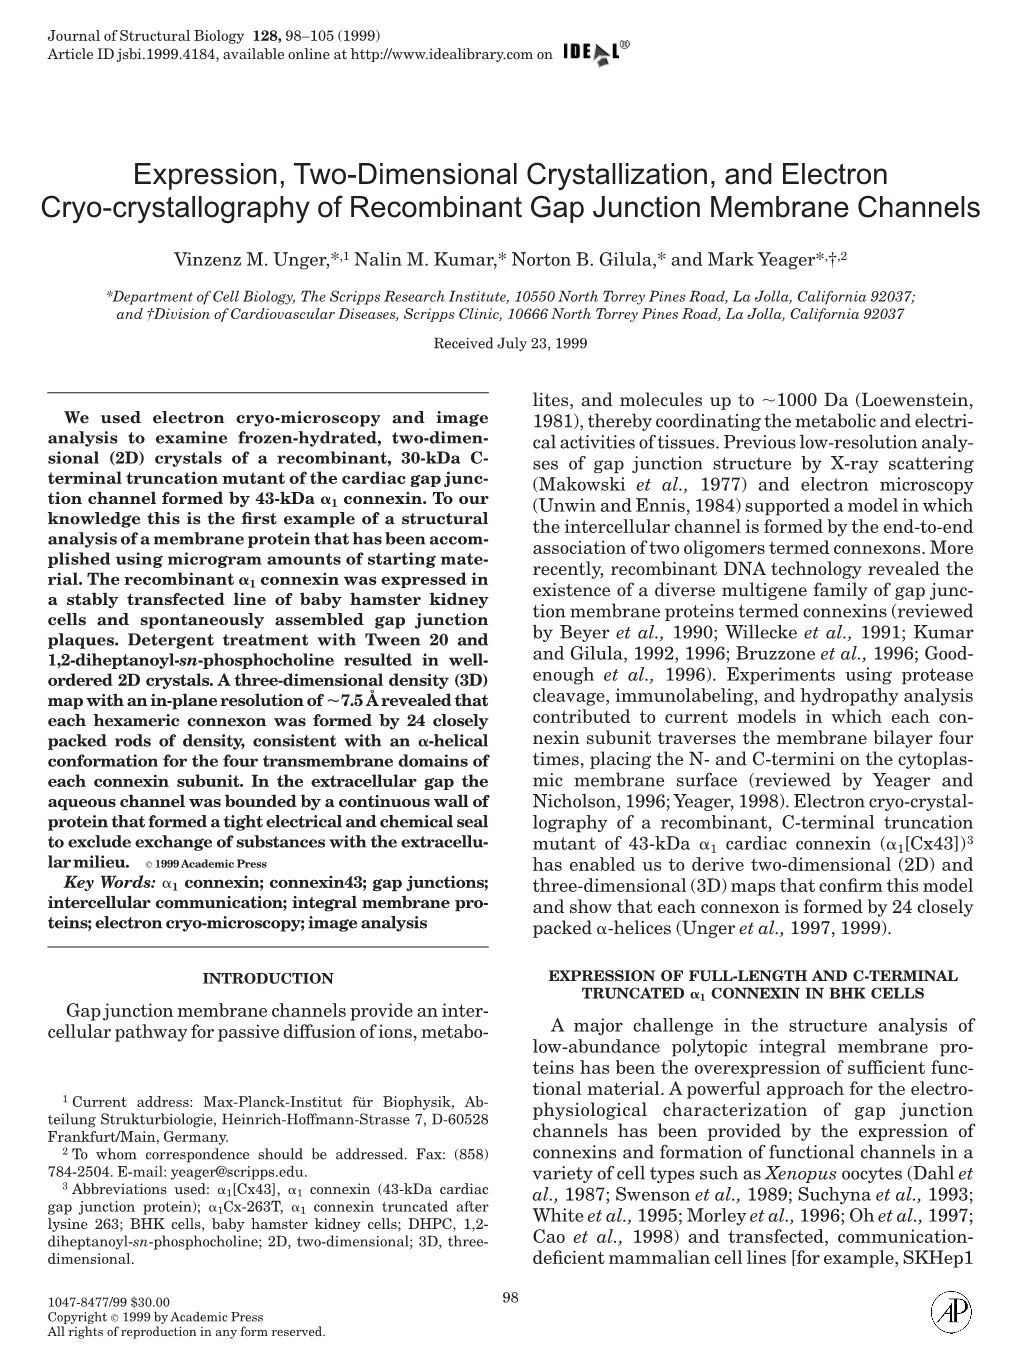 Expression, Two-Dimensional Crystallization, and Electron Cryo-Crystallography of Recombinant Gap Junction Membrane Channels